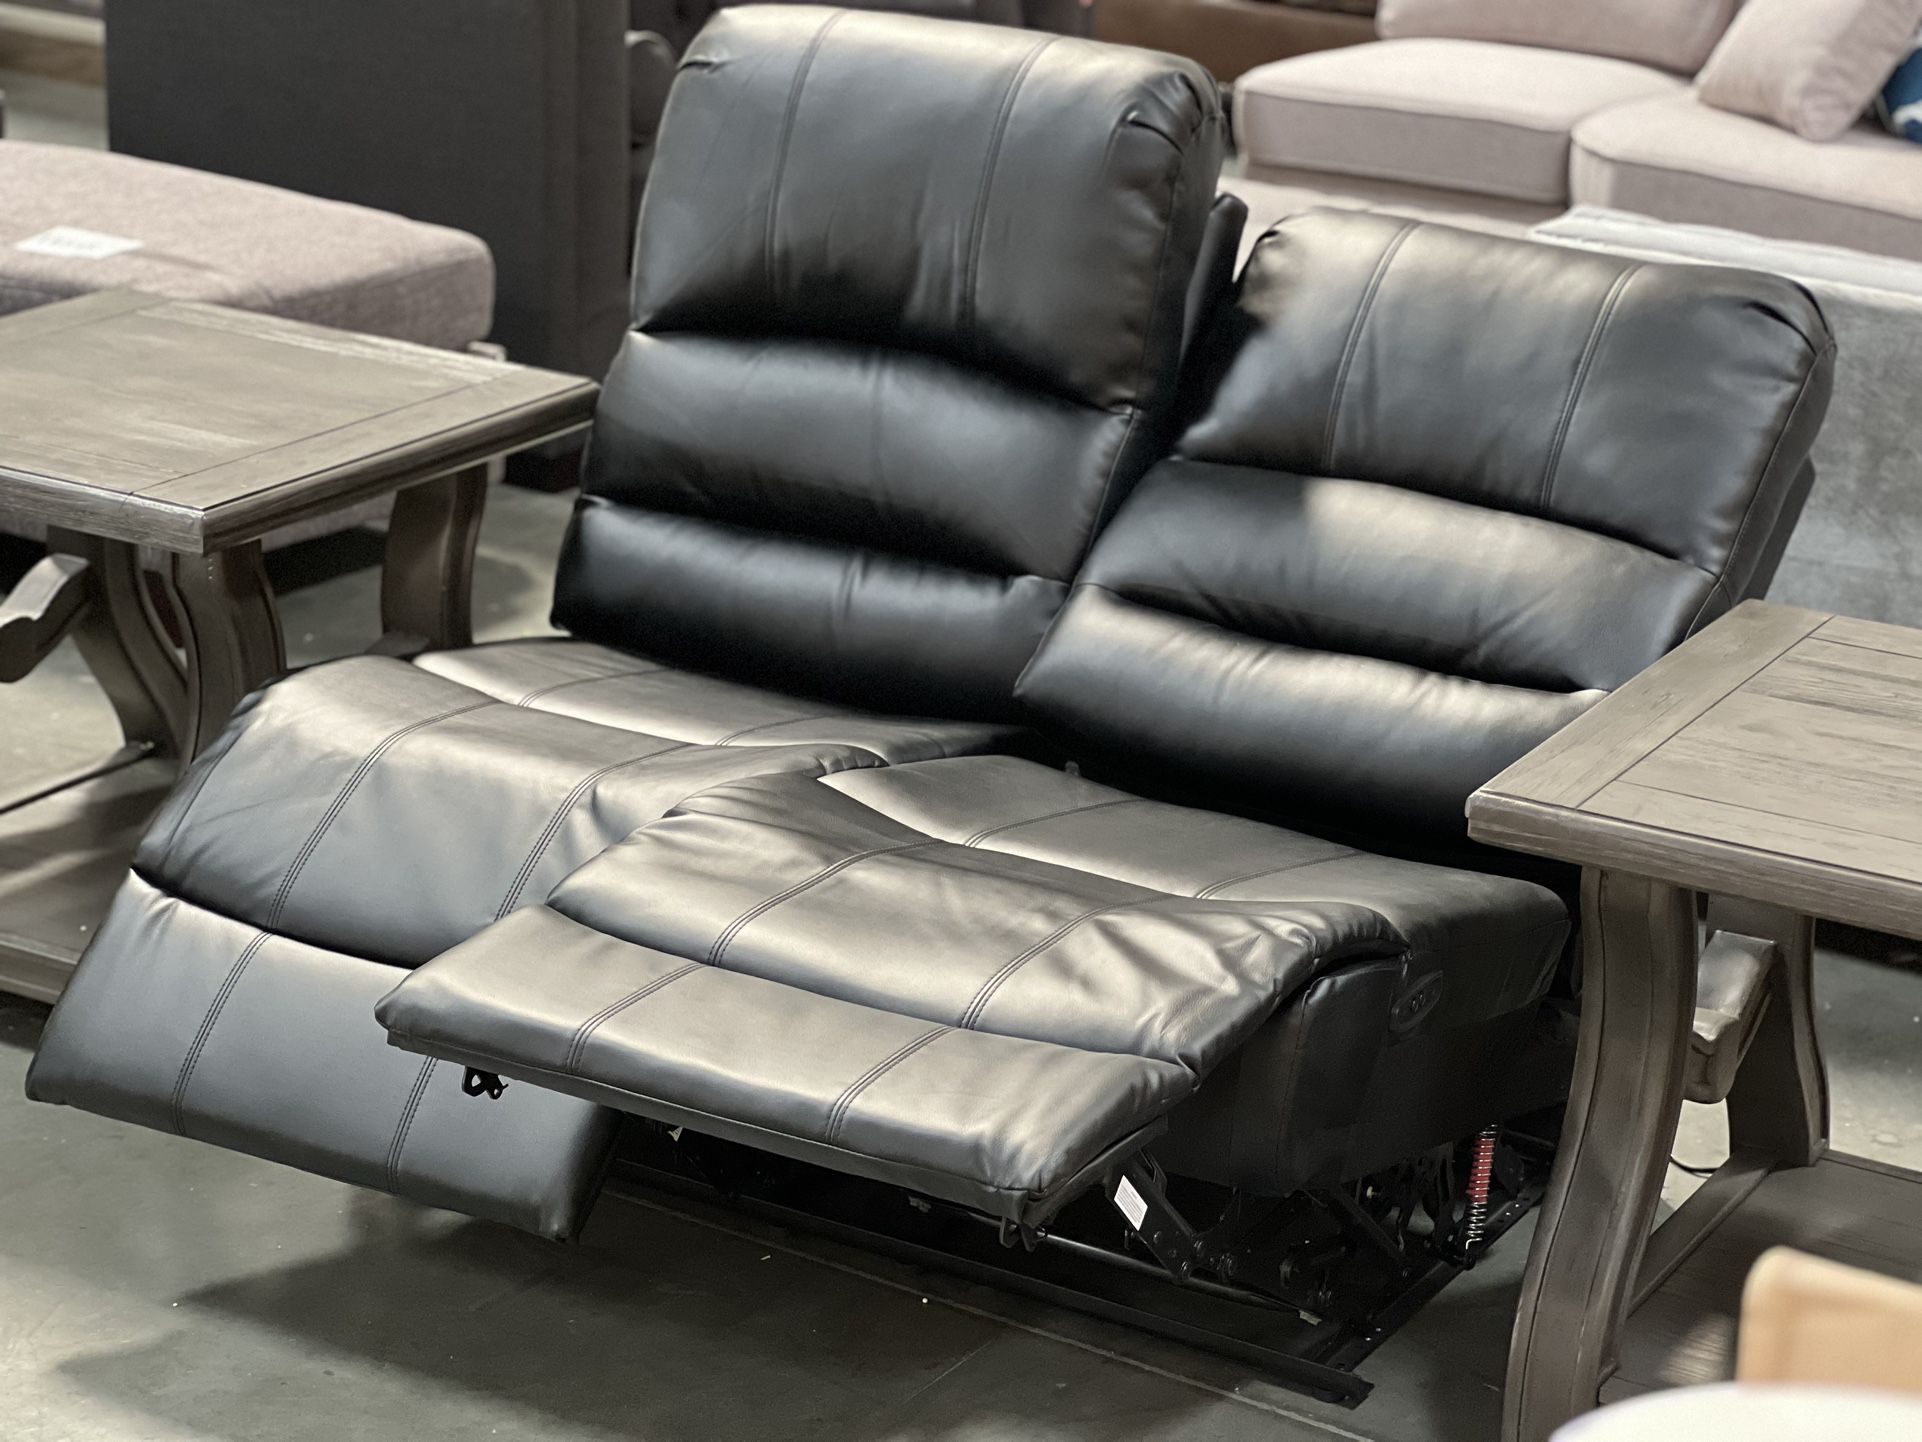 !New!!! Power Motion Recliner, Extra Padded Recliner, Bonded Leather Recliner, Recliner, Recliner Loveseat, Recliner Couch, High Back Recliner